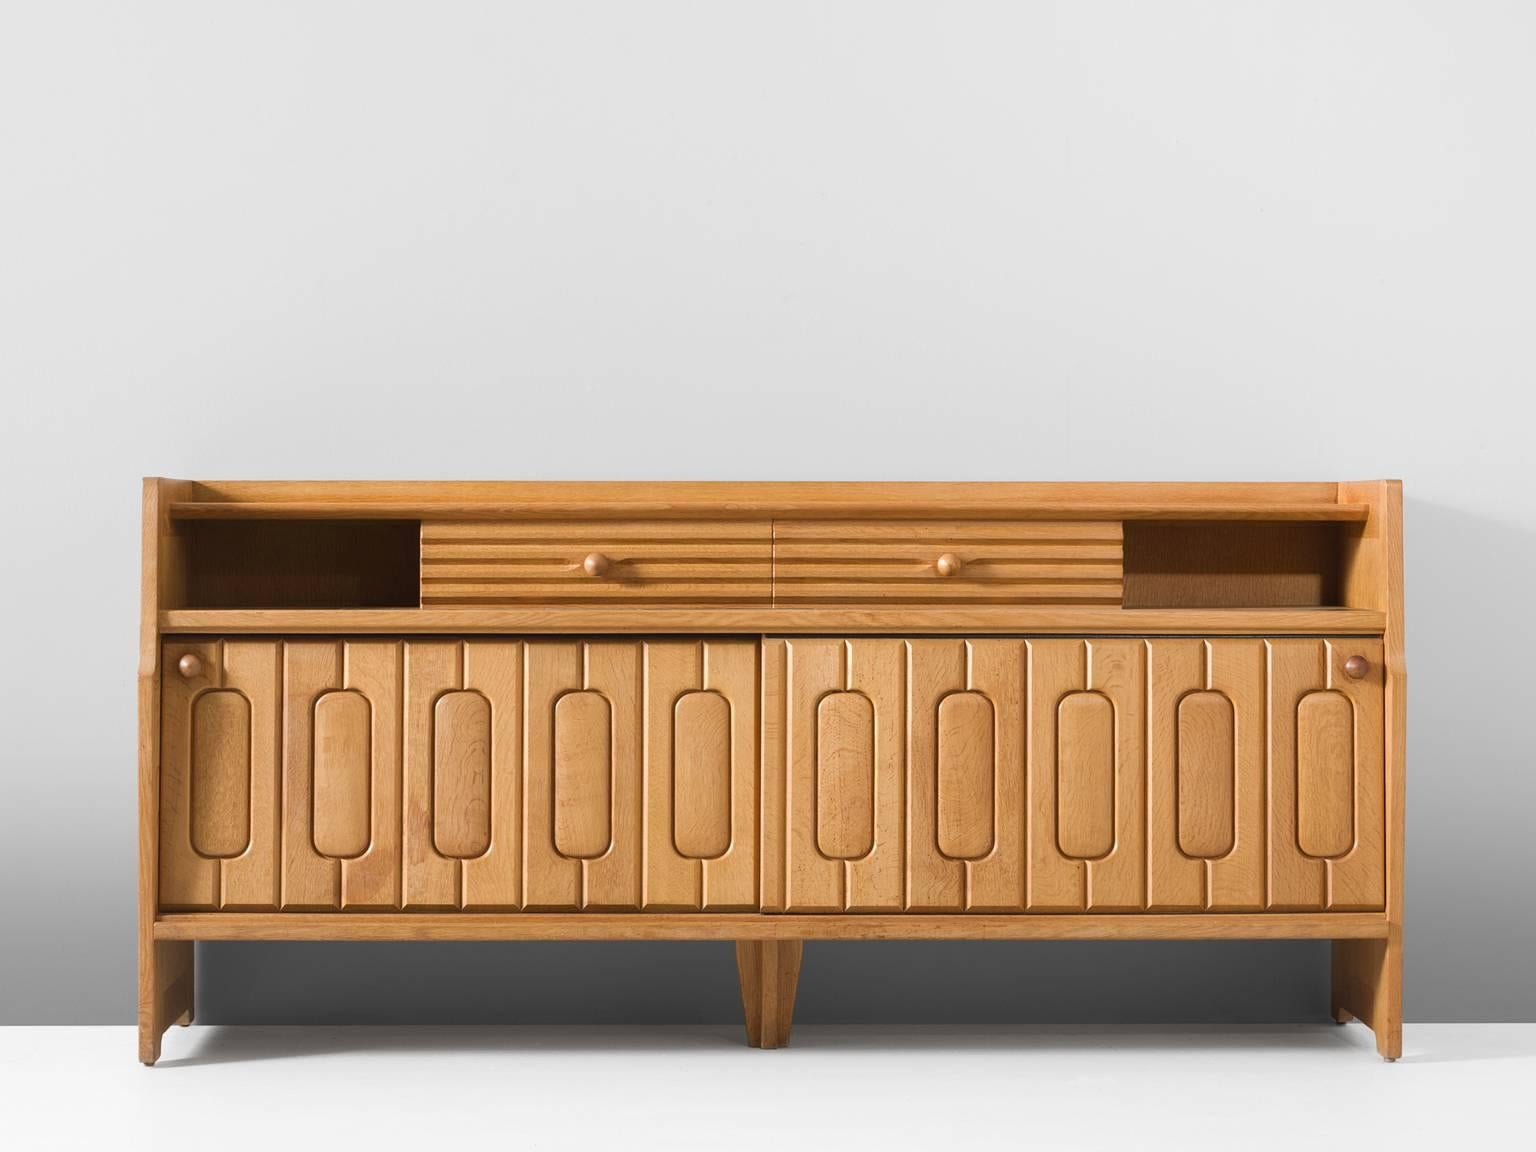 Guillerme et Chambron, sideboard, in oak and ceramic, France, 1960s.

Credenza in oak by French designers Guillerme & Chambron. This sideboard is equipped with two sliding-doors and a set of drawers. The front of the sideboard is beautifully